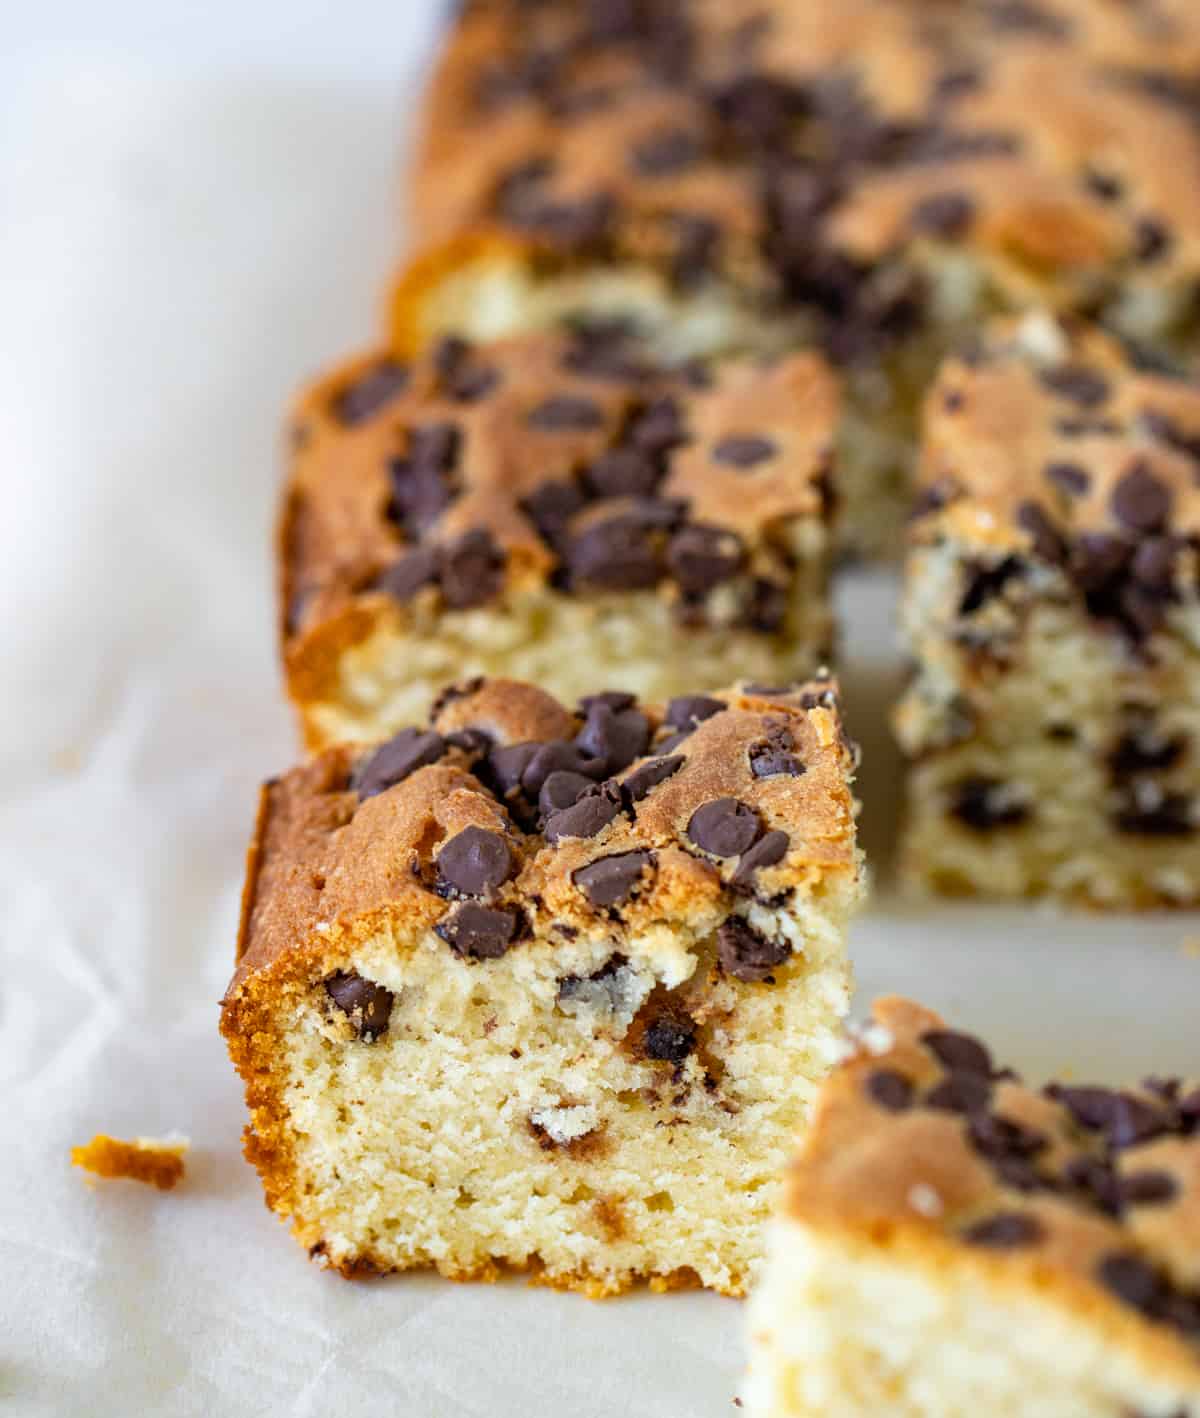 View from above of Squares of vanilla cake with chocolate chips on parchment paper